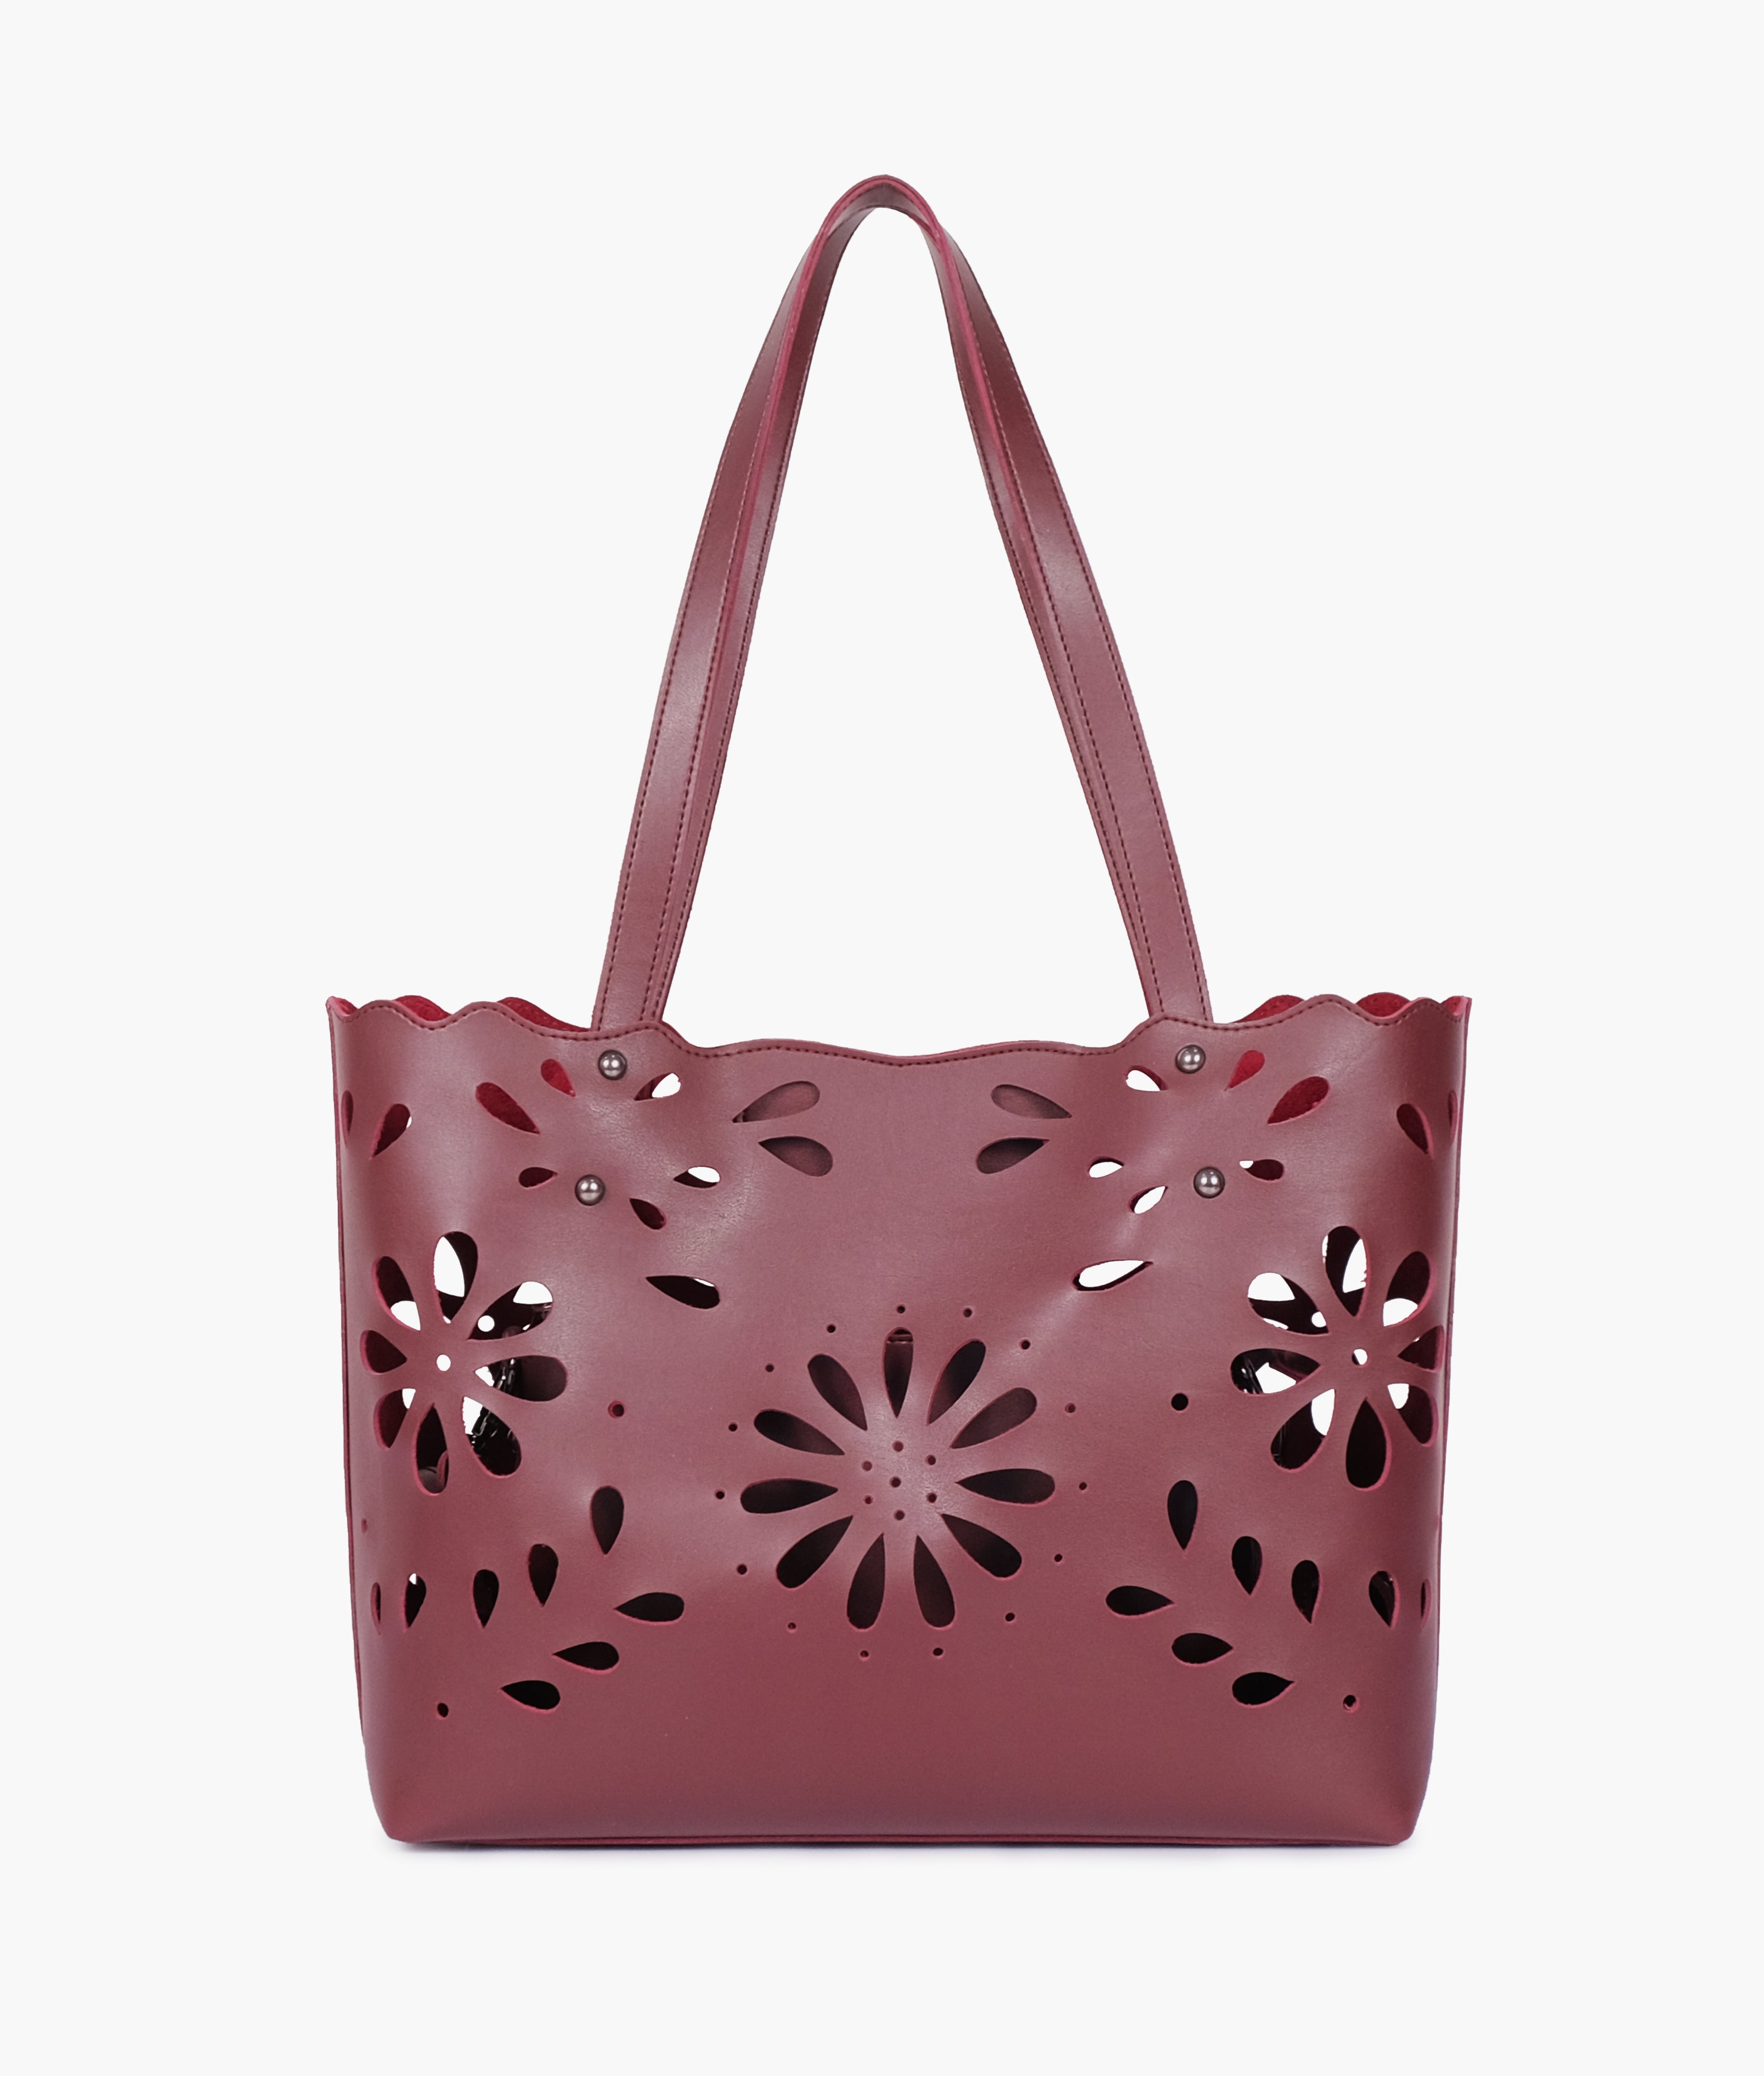 Burgundy two-piece floral tote